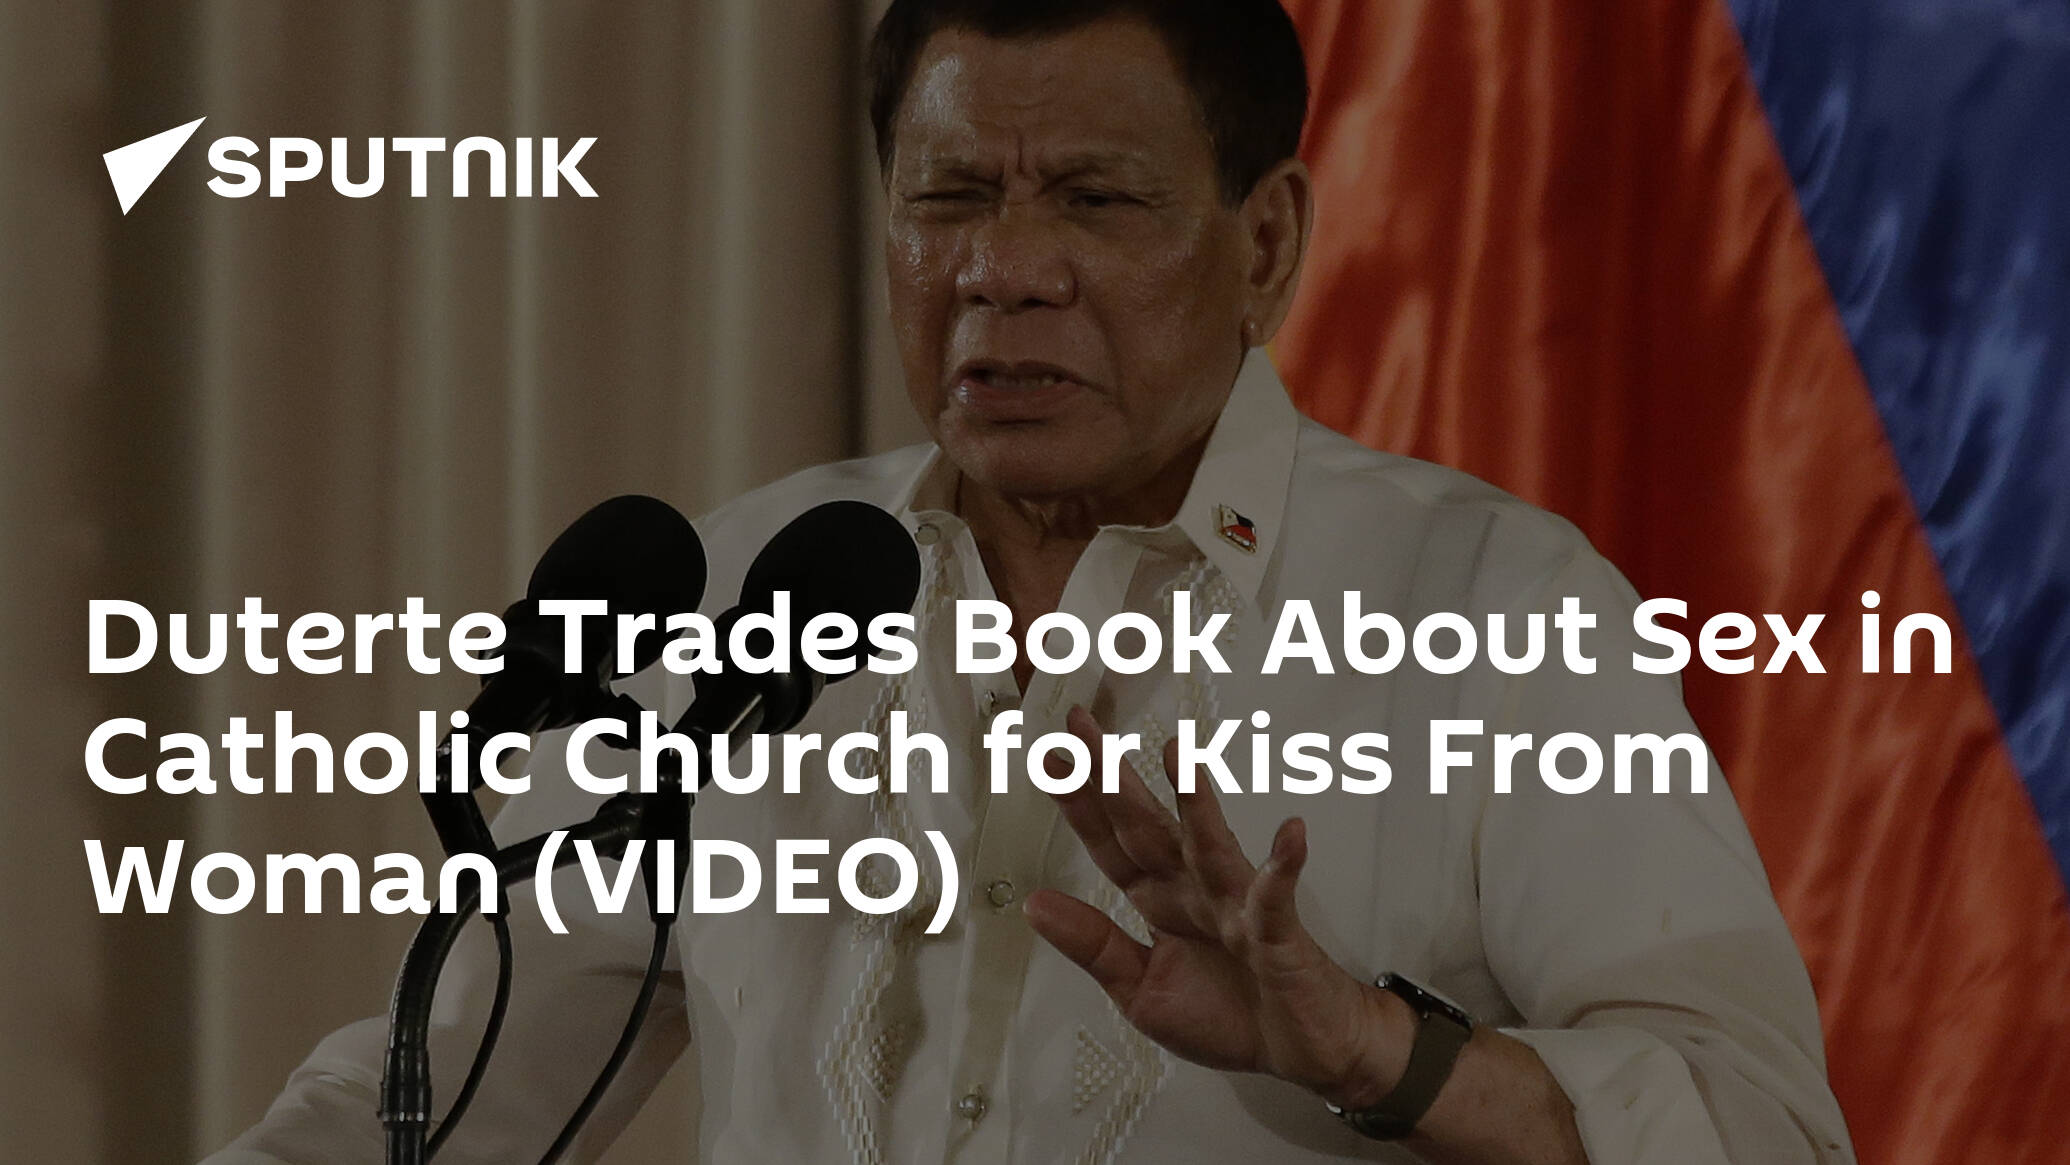 Duterte Trades Book About Sex In Catholic Church For Kiss From Woman Video 04 06 2018